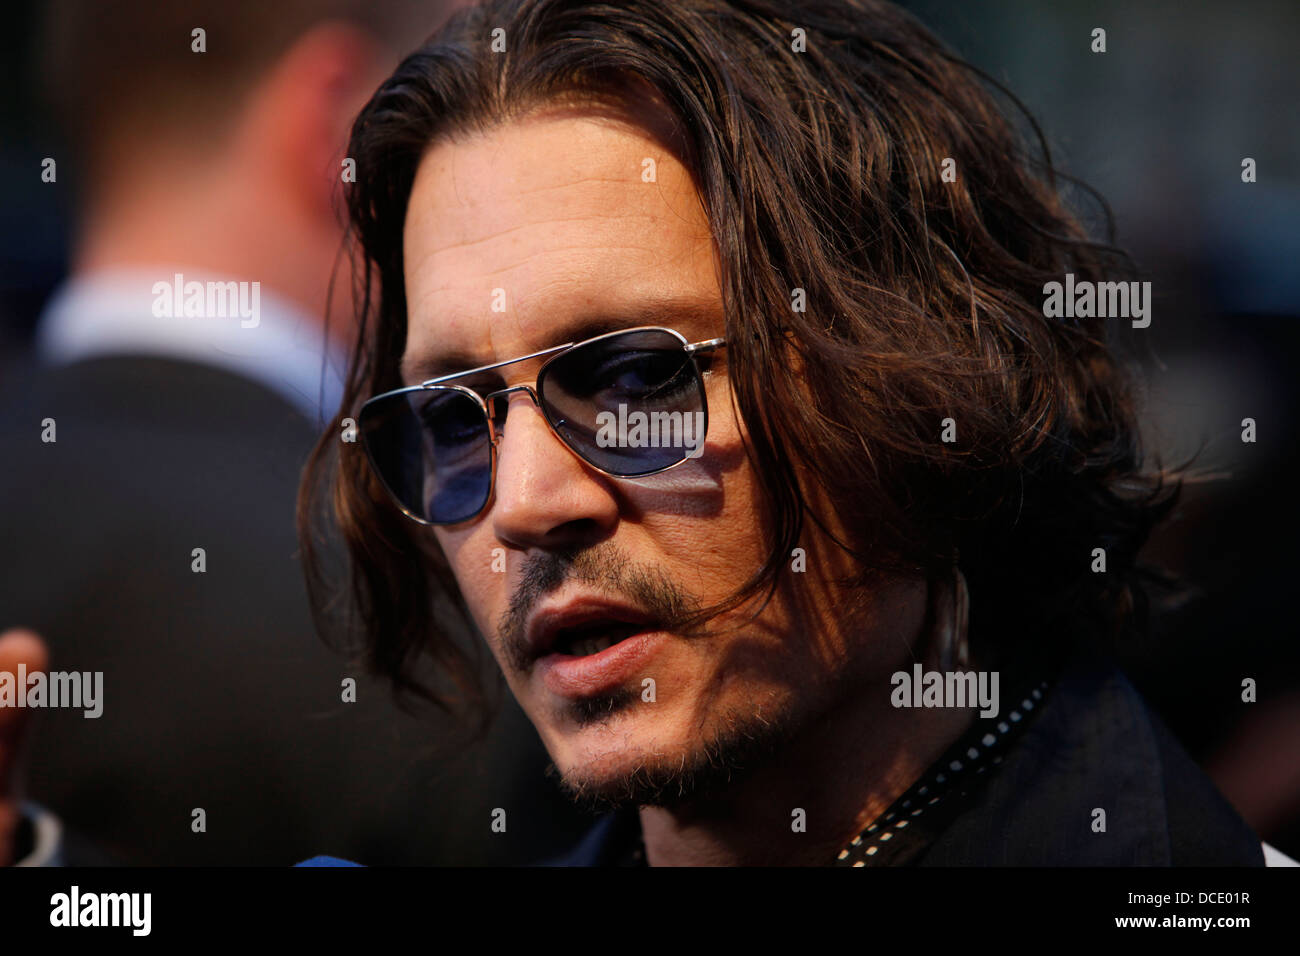 US actor Johnny Depp arrives on the red carpet to attend the UK premiere of the film 'Dark Shadows' in London on May 9, 2012. Stock Photo